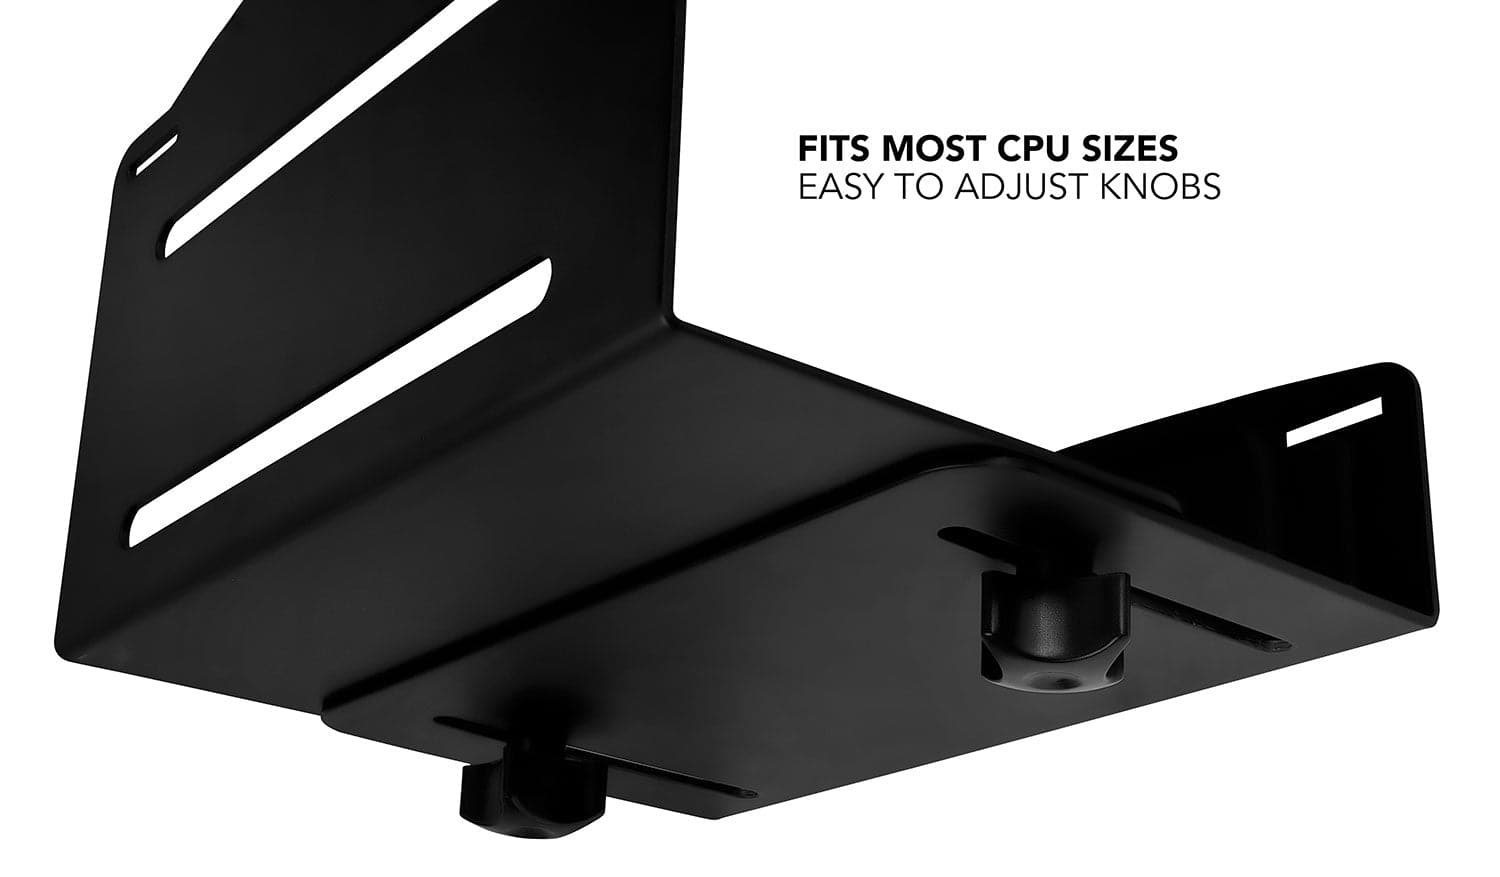 Wall Mounted CPU Holder with Secure Straps